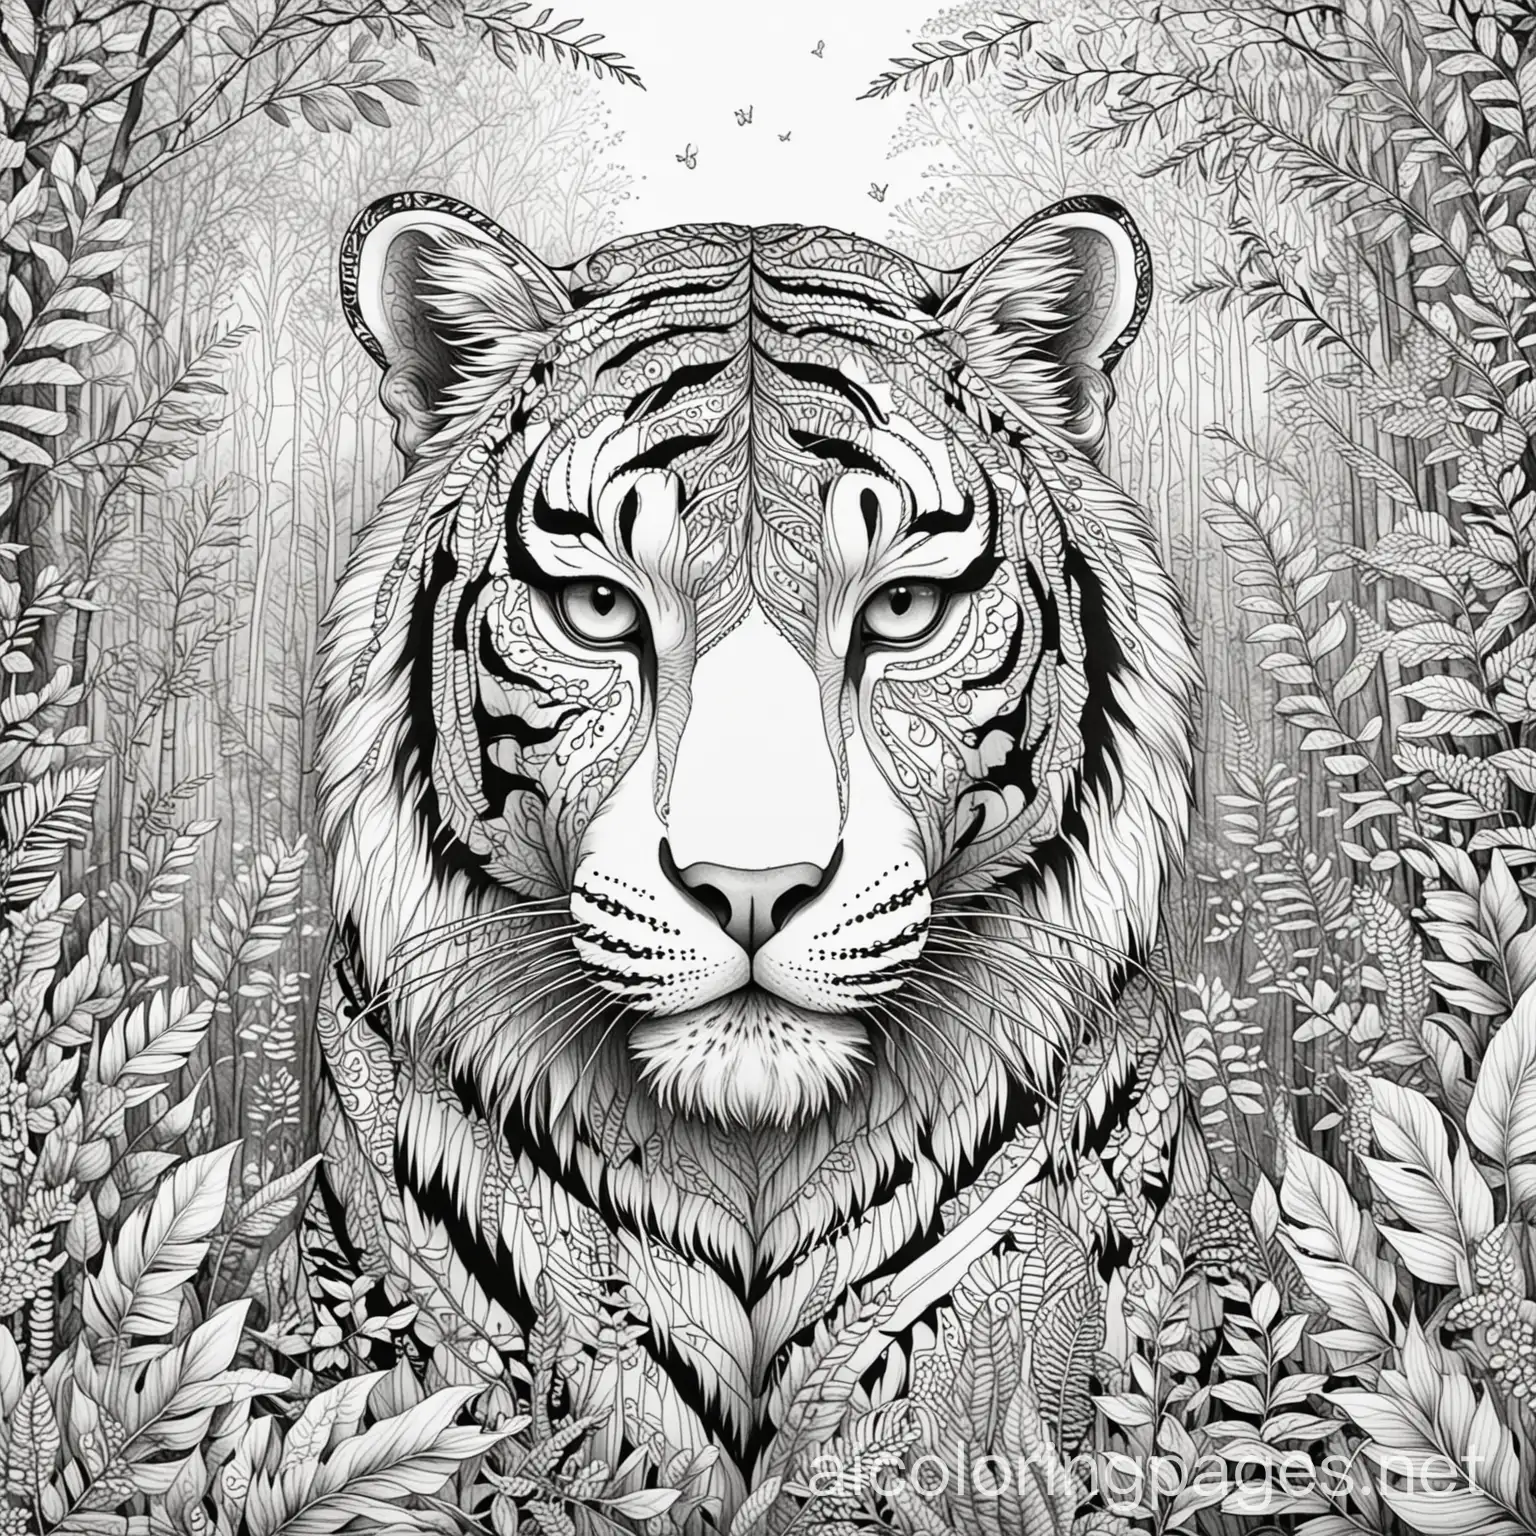 zentagle tiger forest love
, Coloring Page, black and white, line art, white background, Simplicity, Ample White Space. The background of the coloring page is plain white to make it easy for young children to color within the lines. The outlines of all the subjects are easy to distinguish, making it simple for kids to color without too much difficulty